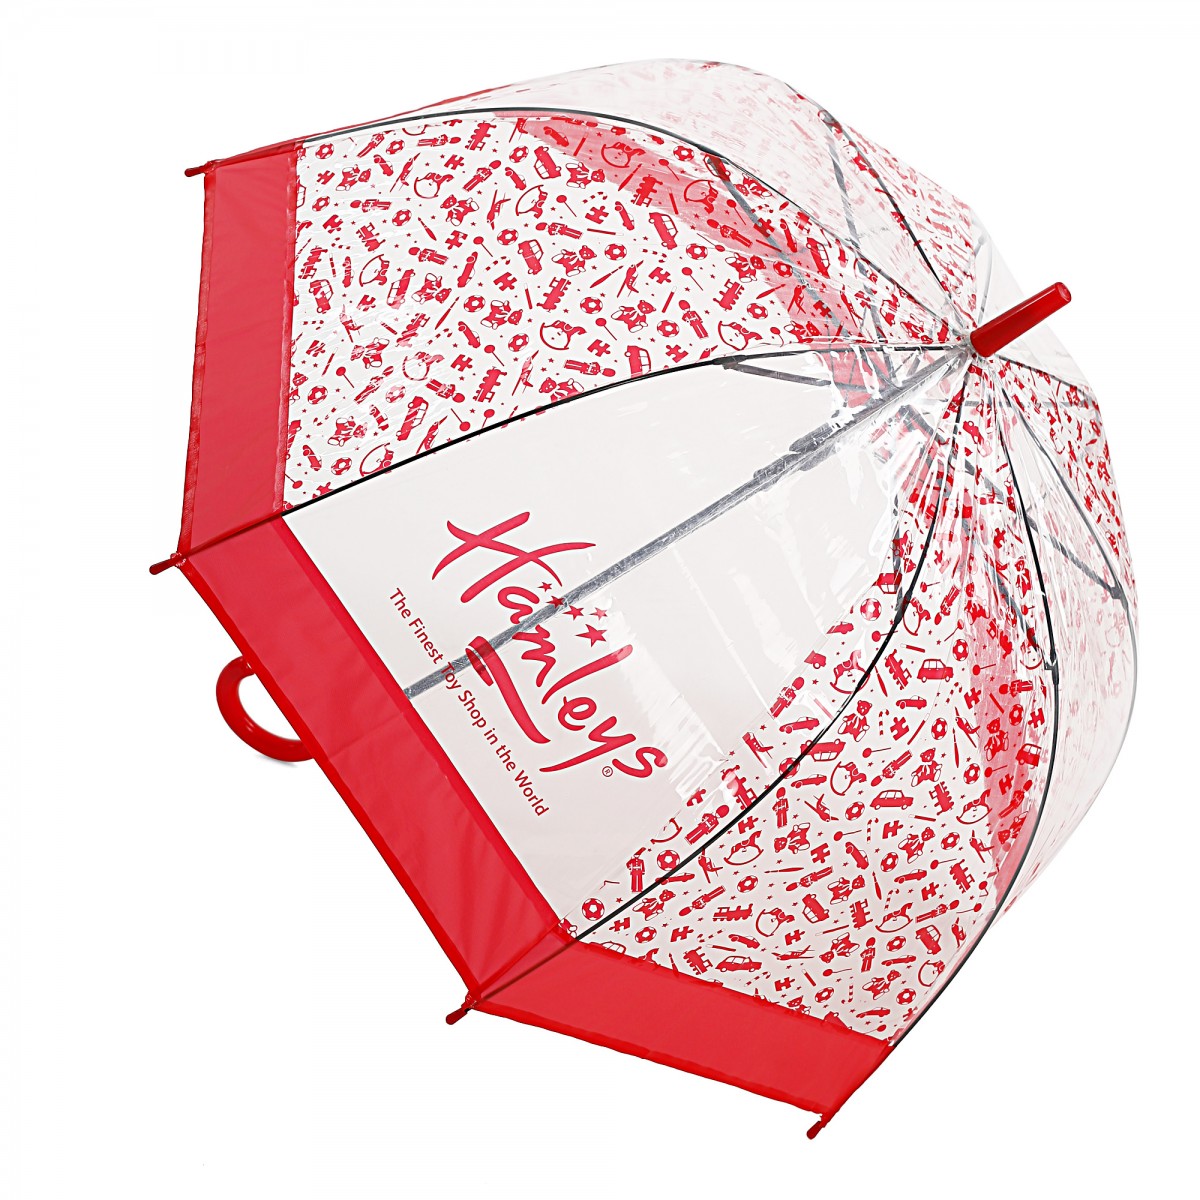 Hamleys London Print 24 inches Single Fold Rain Umbrella with POE Bend Handle and Auto Open Long Umbrellas, Kids for 5Y+, White